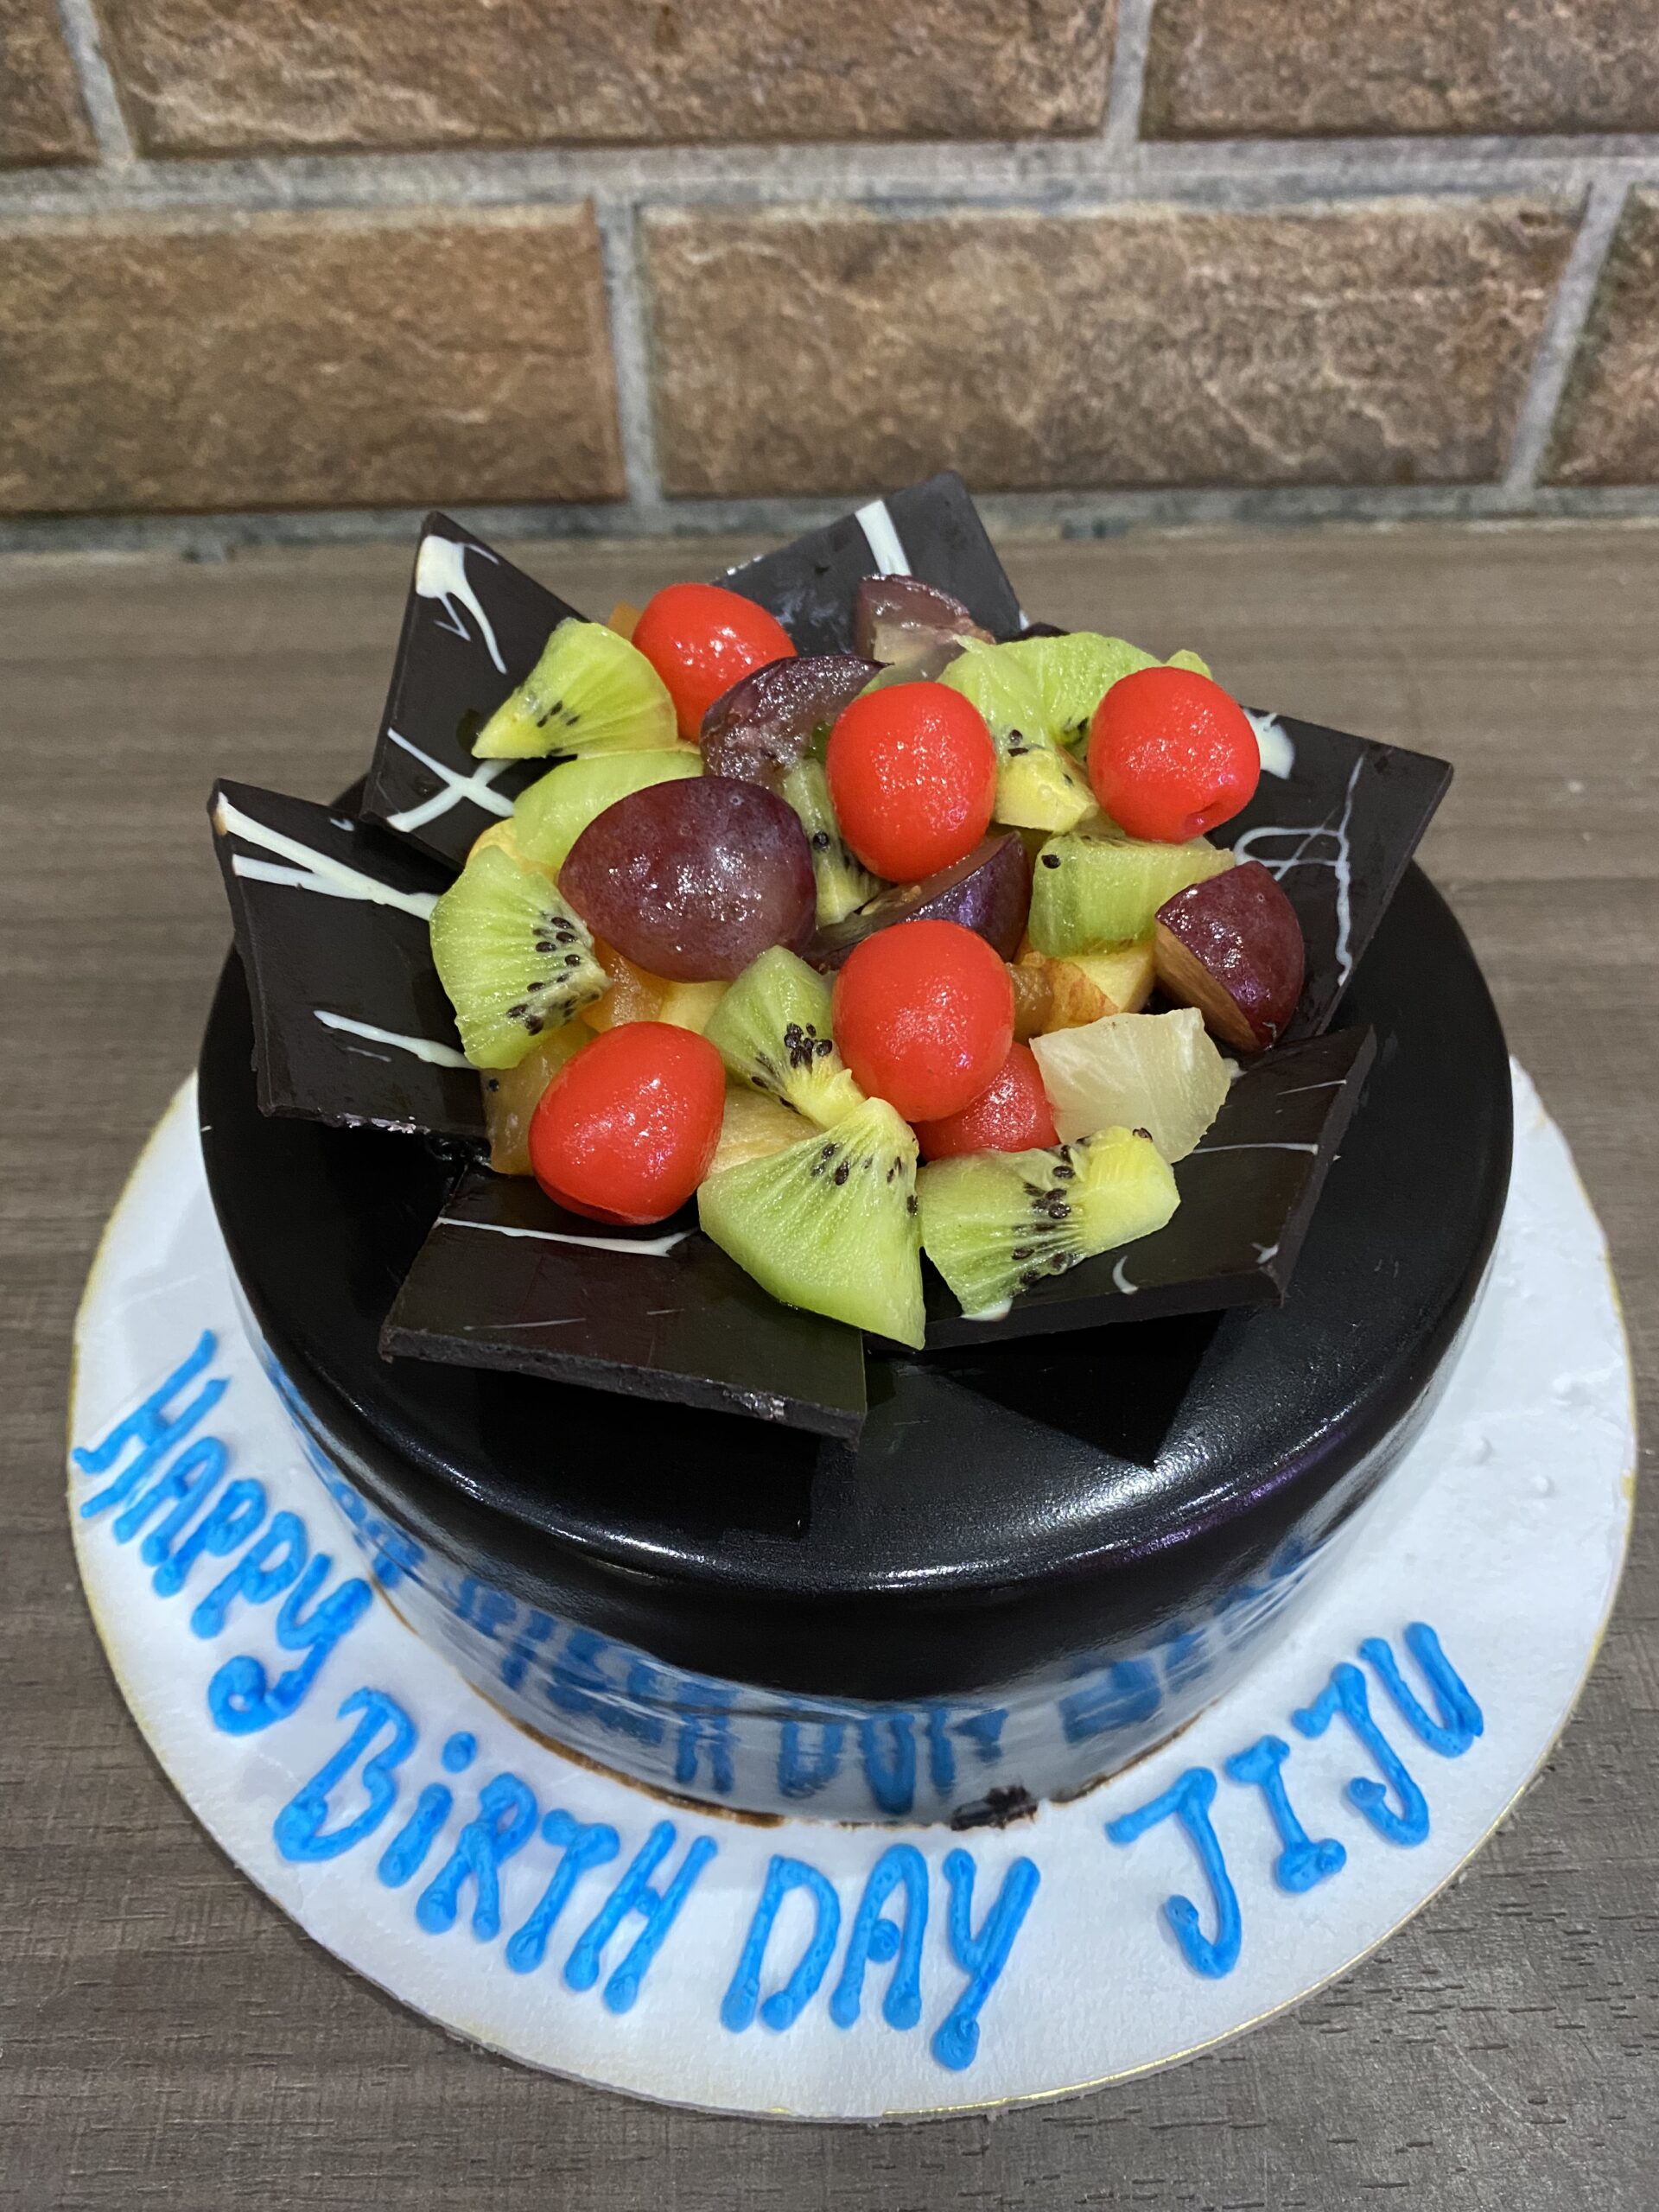 Special Happy Birthday Wishes And Chocolate Cake For Dear Jiju